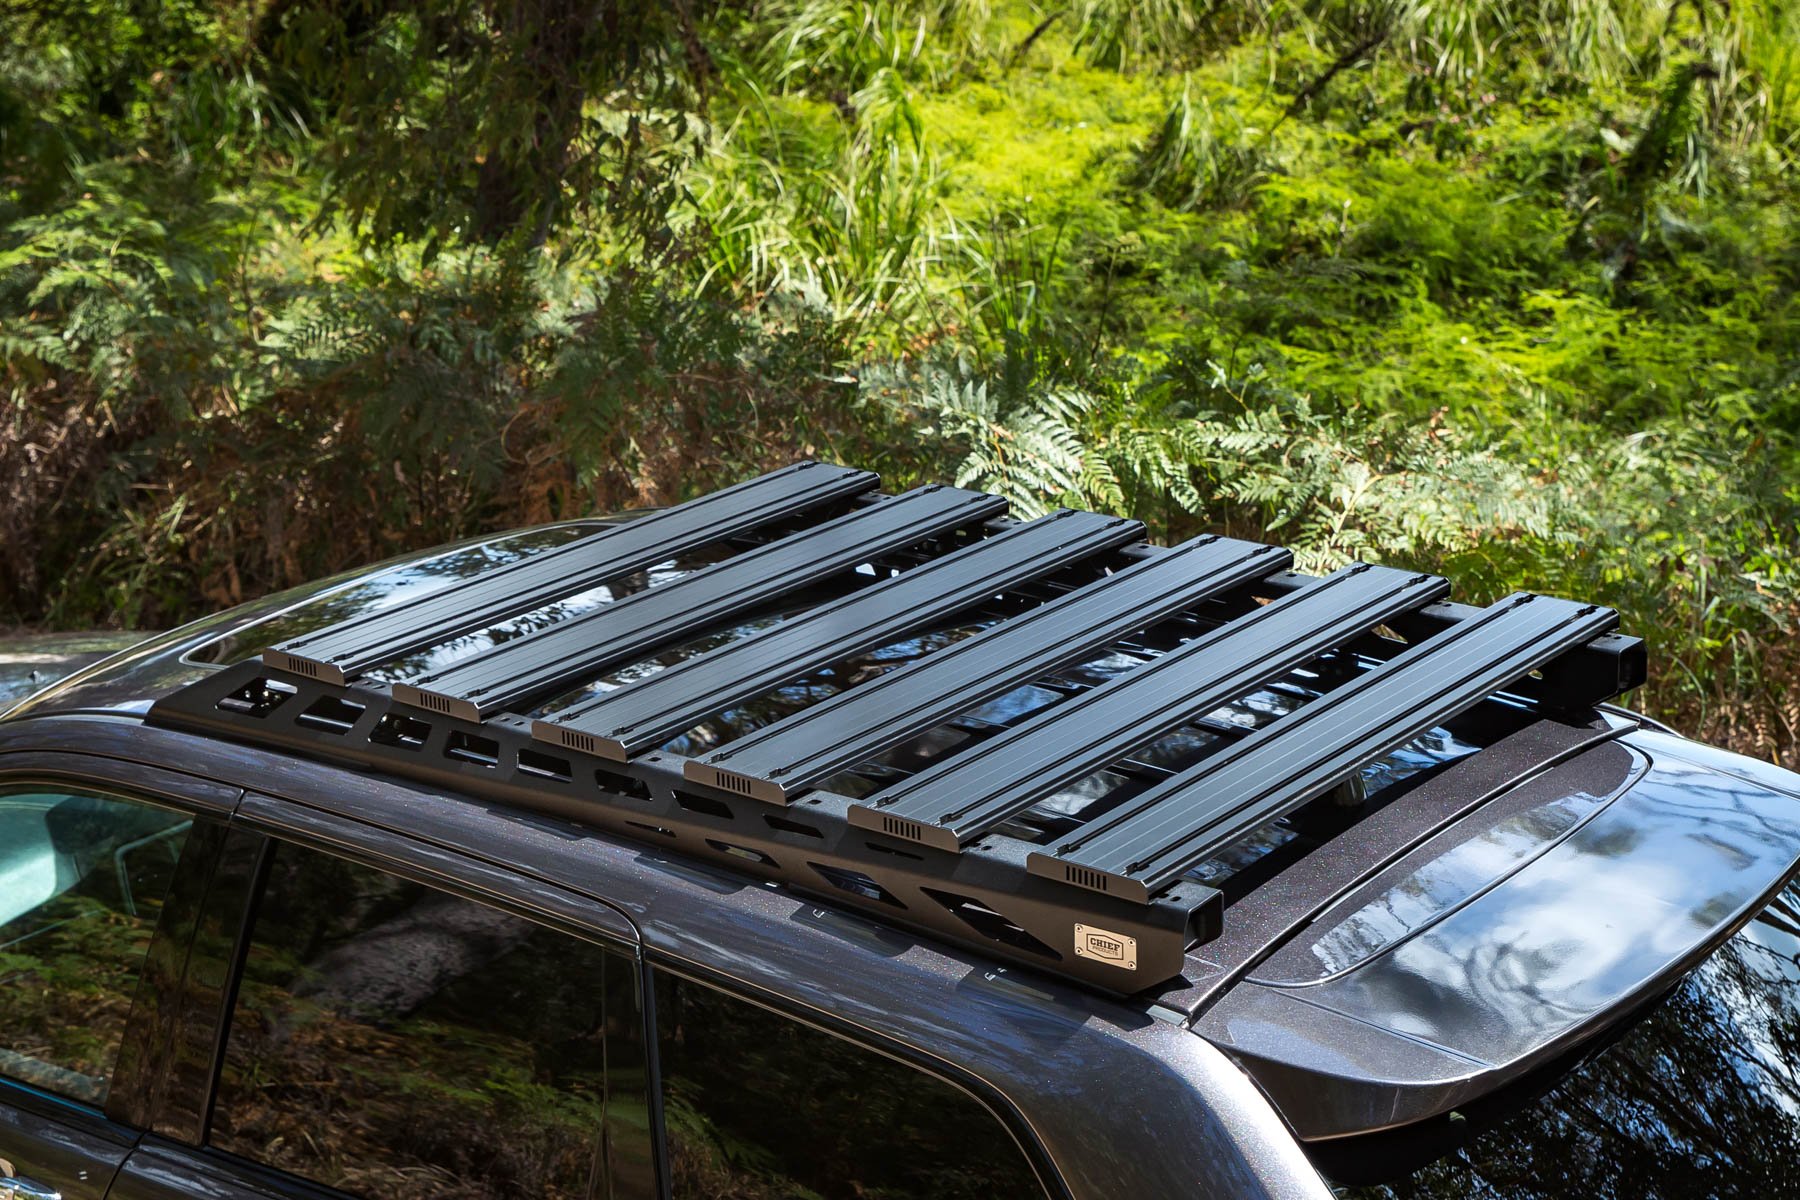 Chief Products WK2 Grand Cherokee Roof Rack